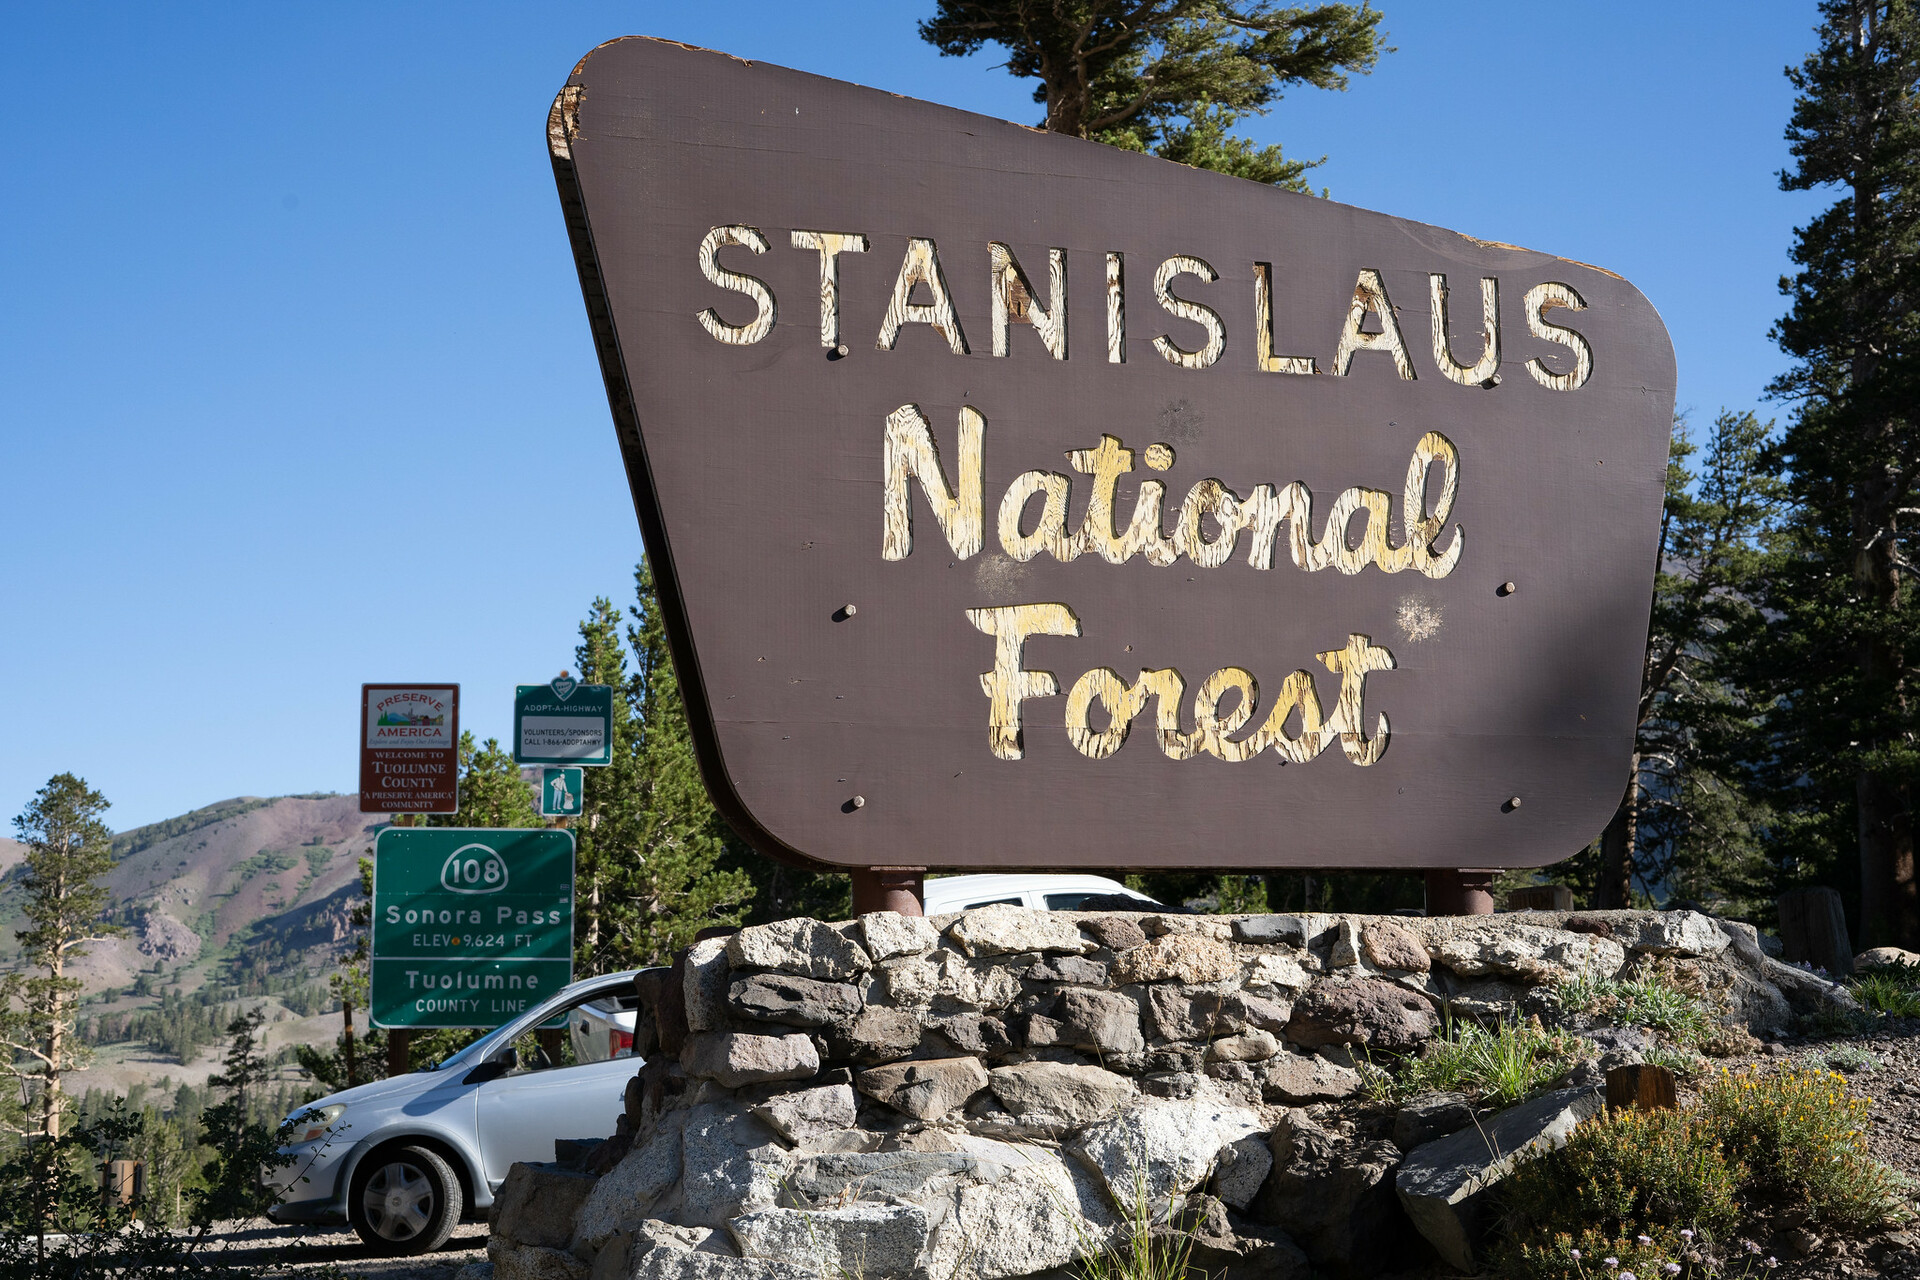 A large brown wooden sign that says STANISLAUS NATIONAL FOREST in yellow lettering, with a silver car visible behind it and a hill in the background